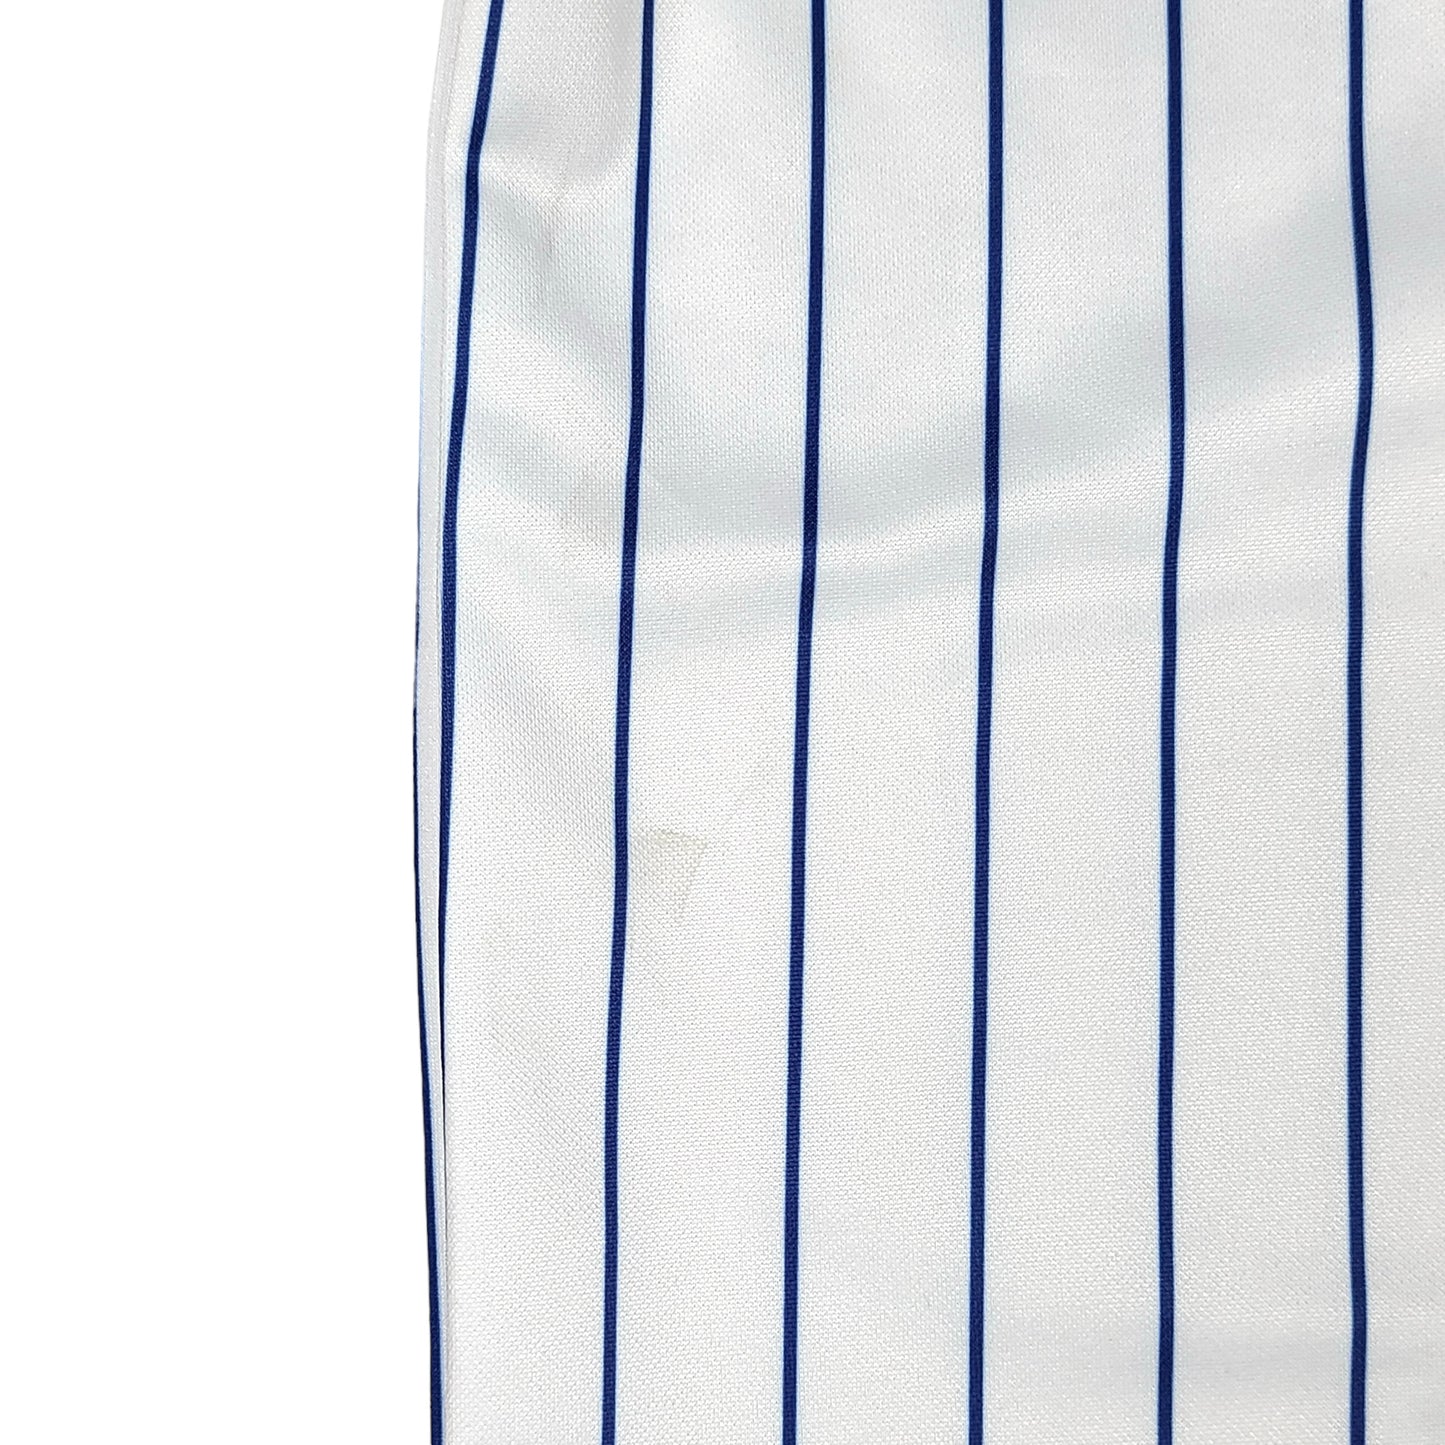 Geovany Soto Chicago Cubs MLB Pinstripe Majestic Baseball Jersey